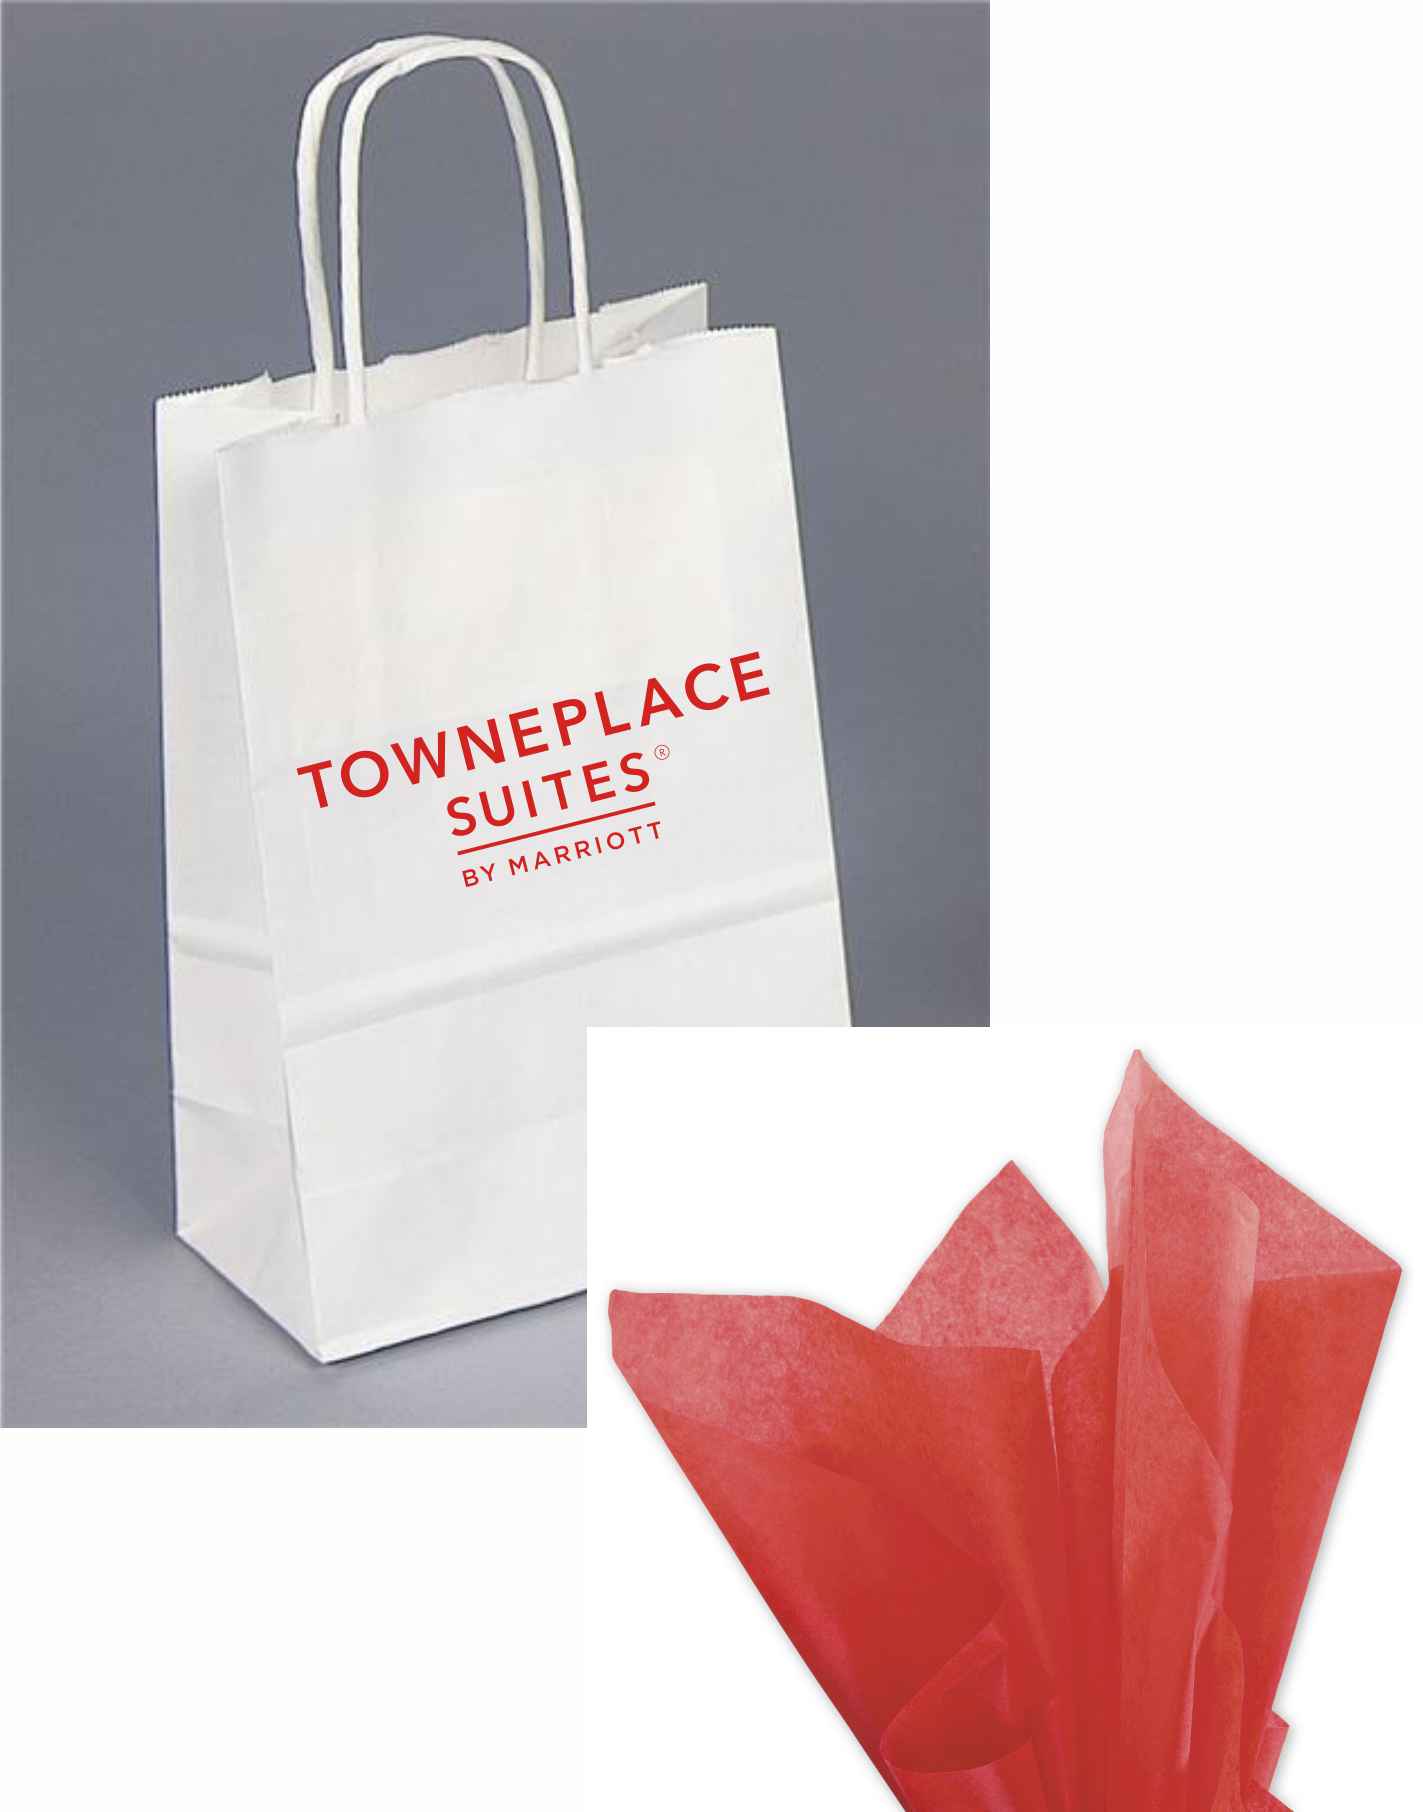 TownePlace Suites label - Perfect for guests, clients and the breakfast bar!